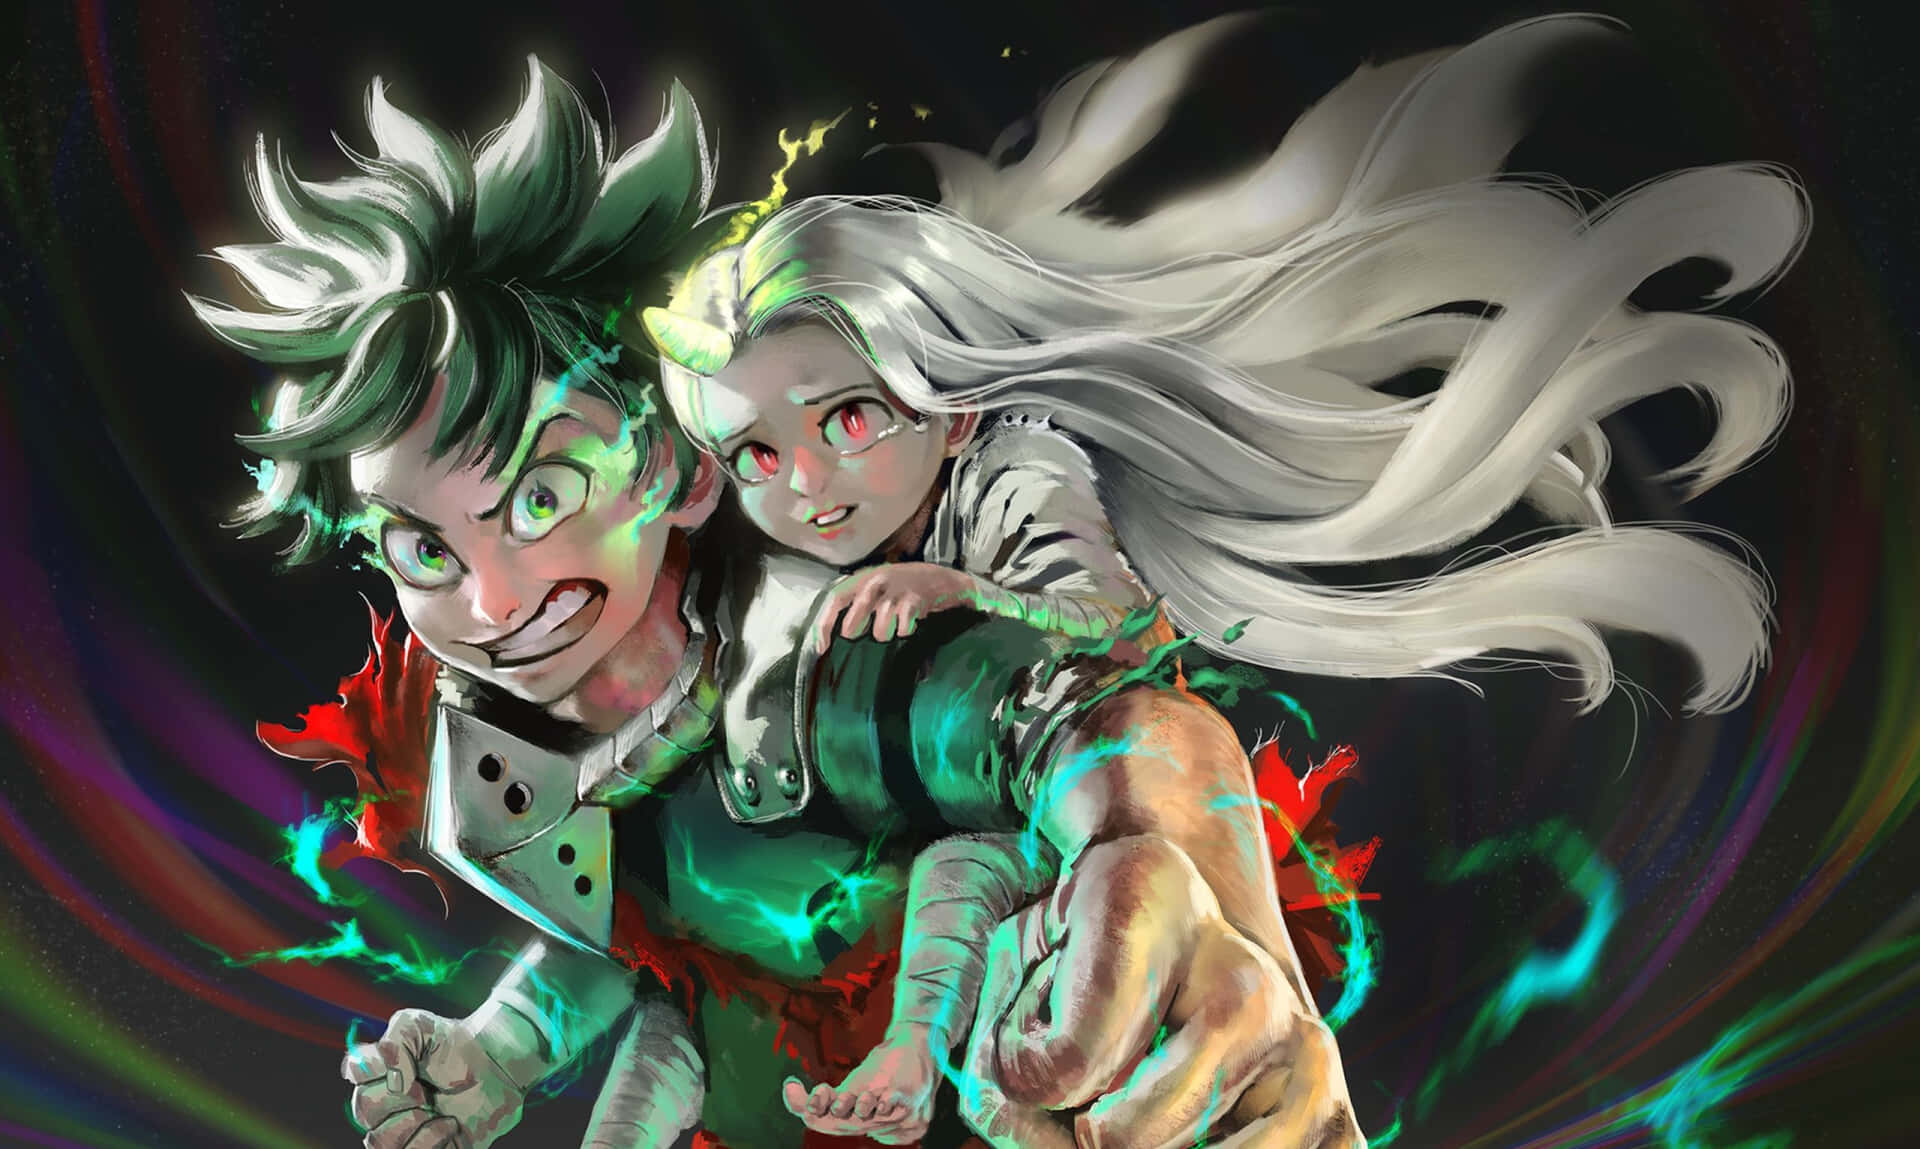 Deku and All Might, Engaged in a Character Defining Moment in 'My Hero Academia' Wallpaper